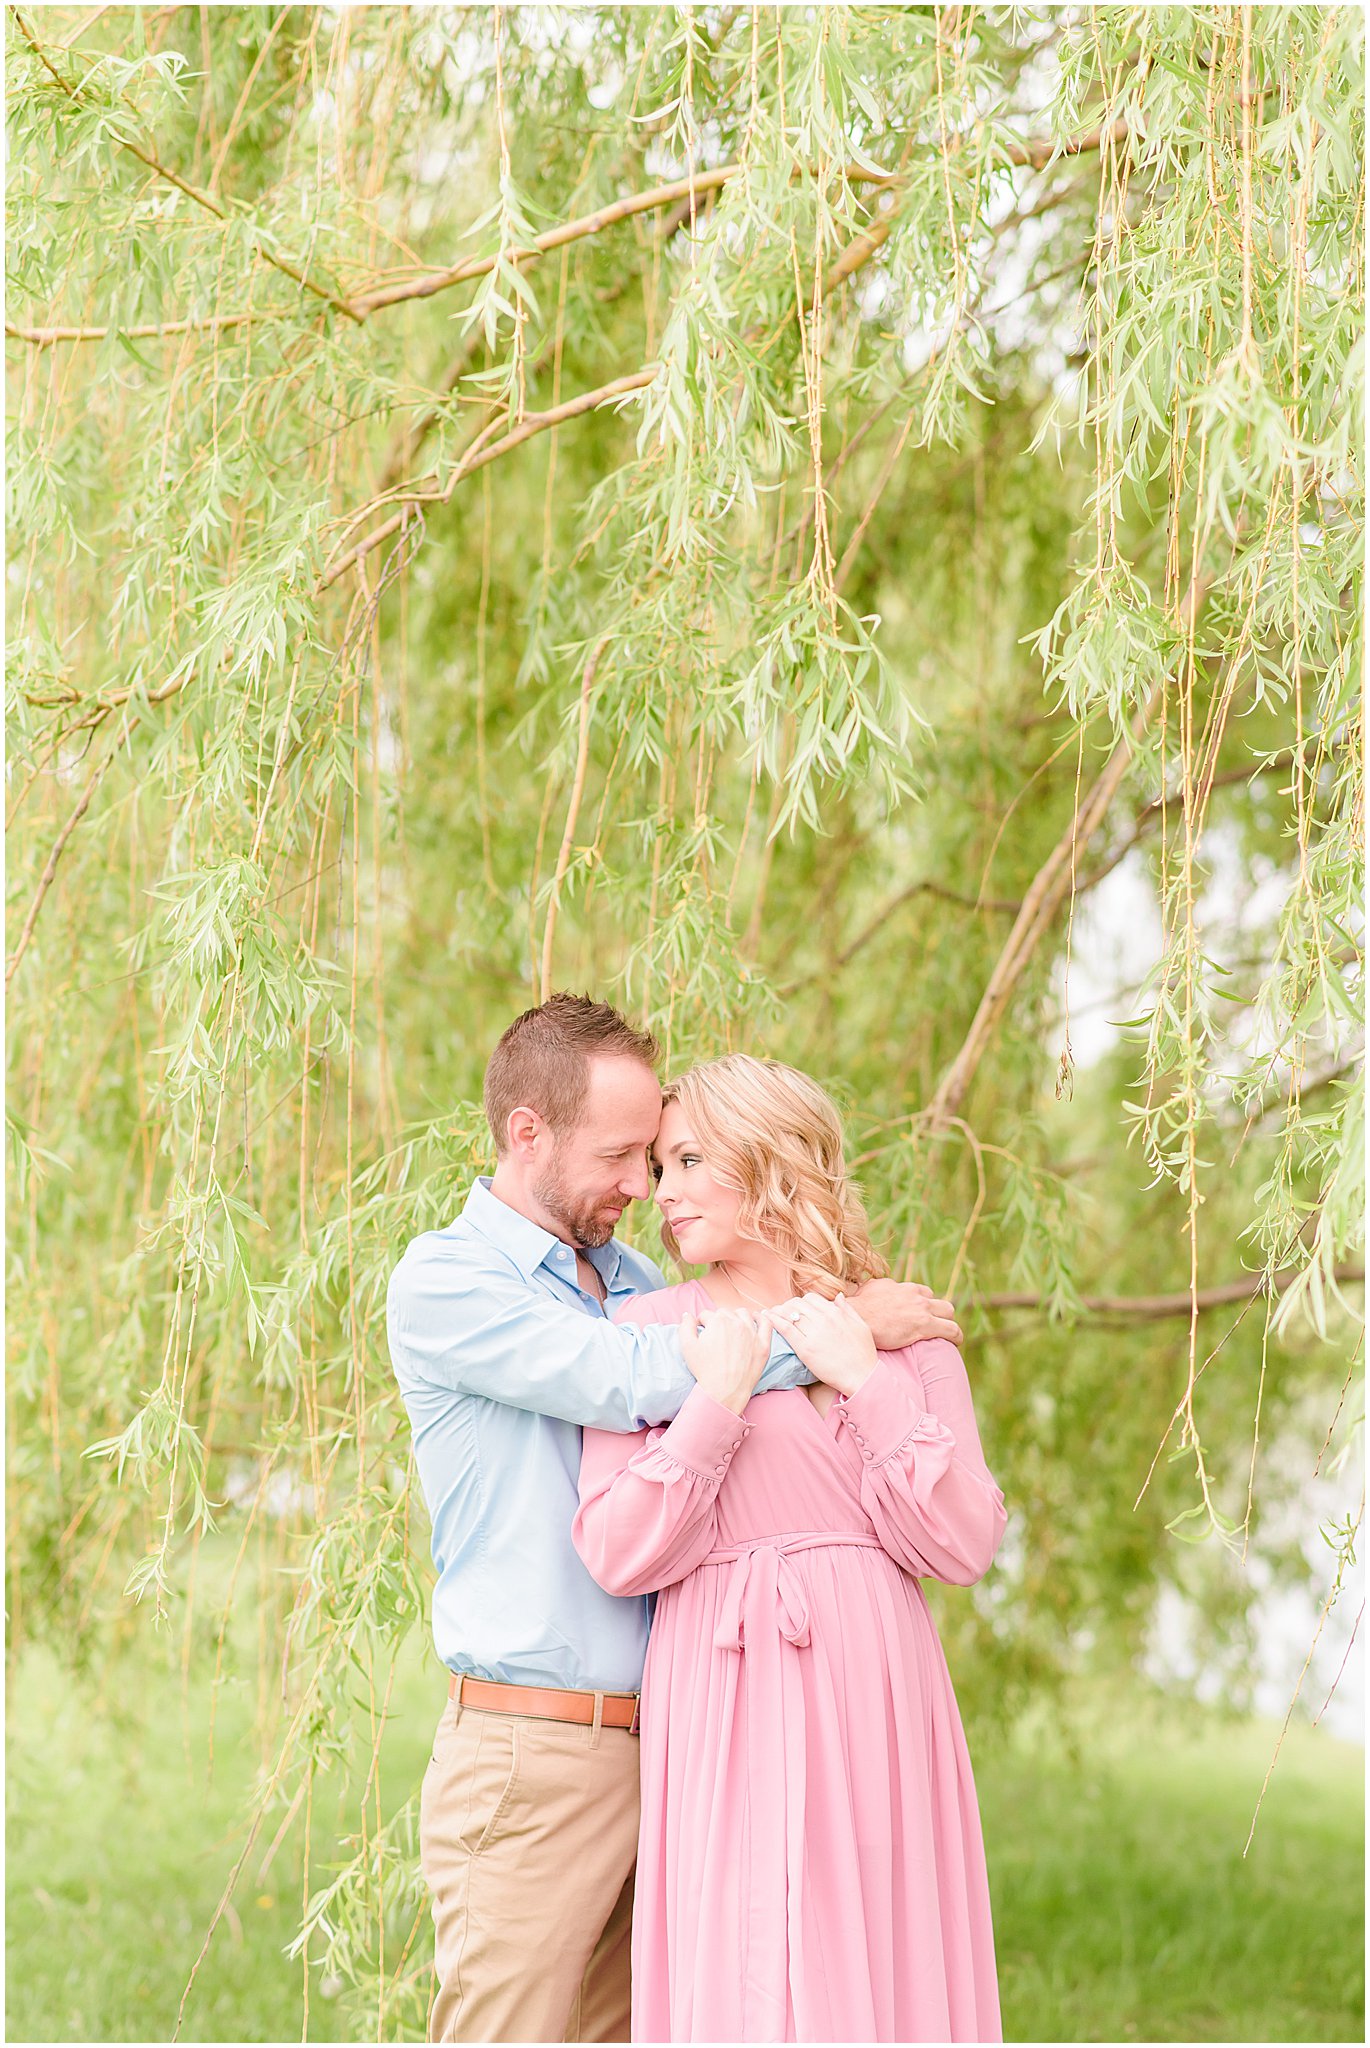 Couple nose to nose by willow tree during Coxhall Gardens engagement session